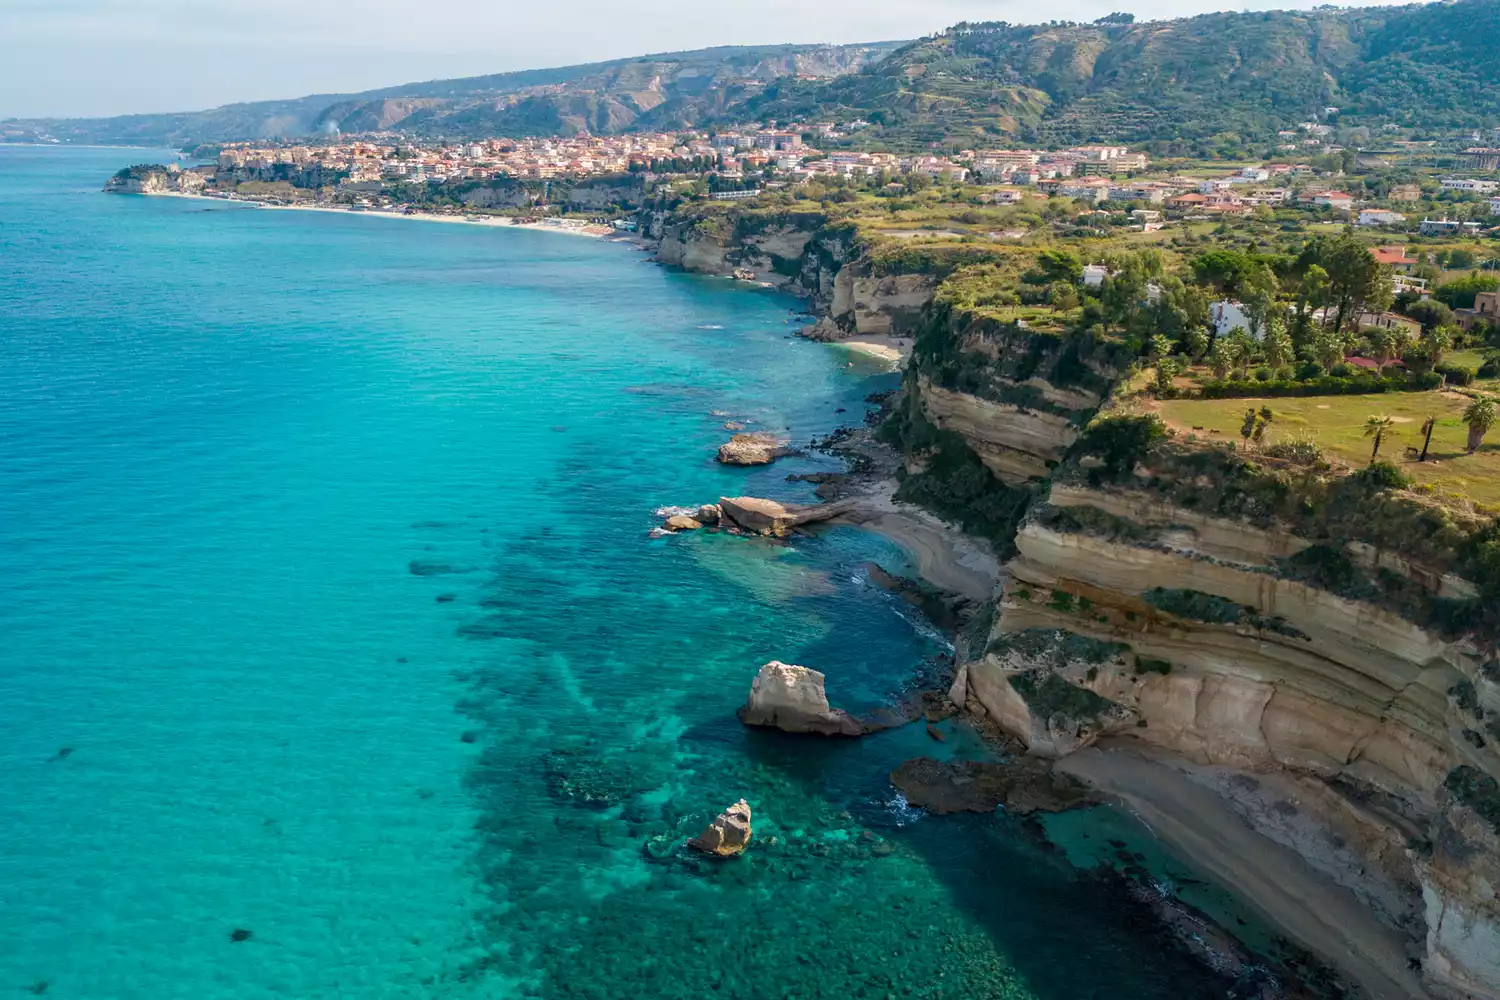 10 Destinations Popular with Italian Tourists in Italy, Per a Local